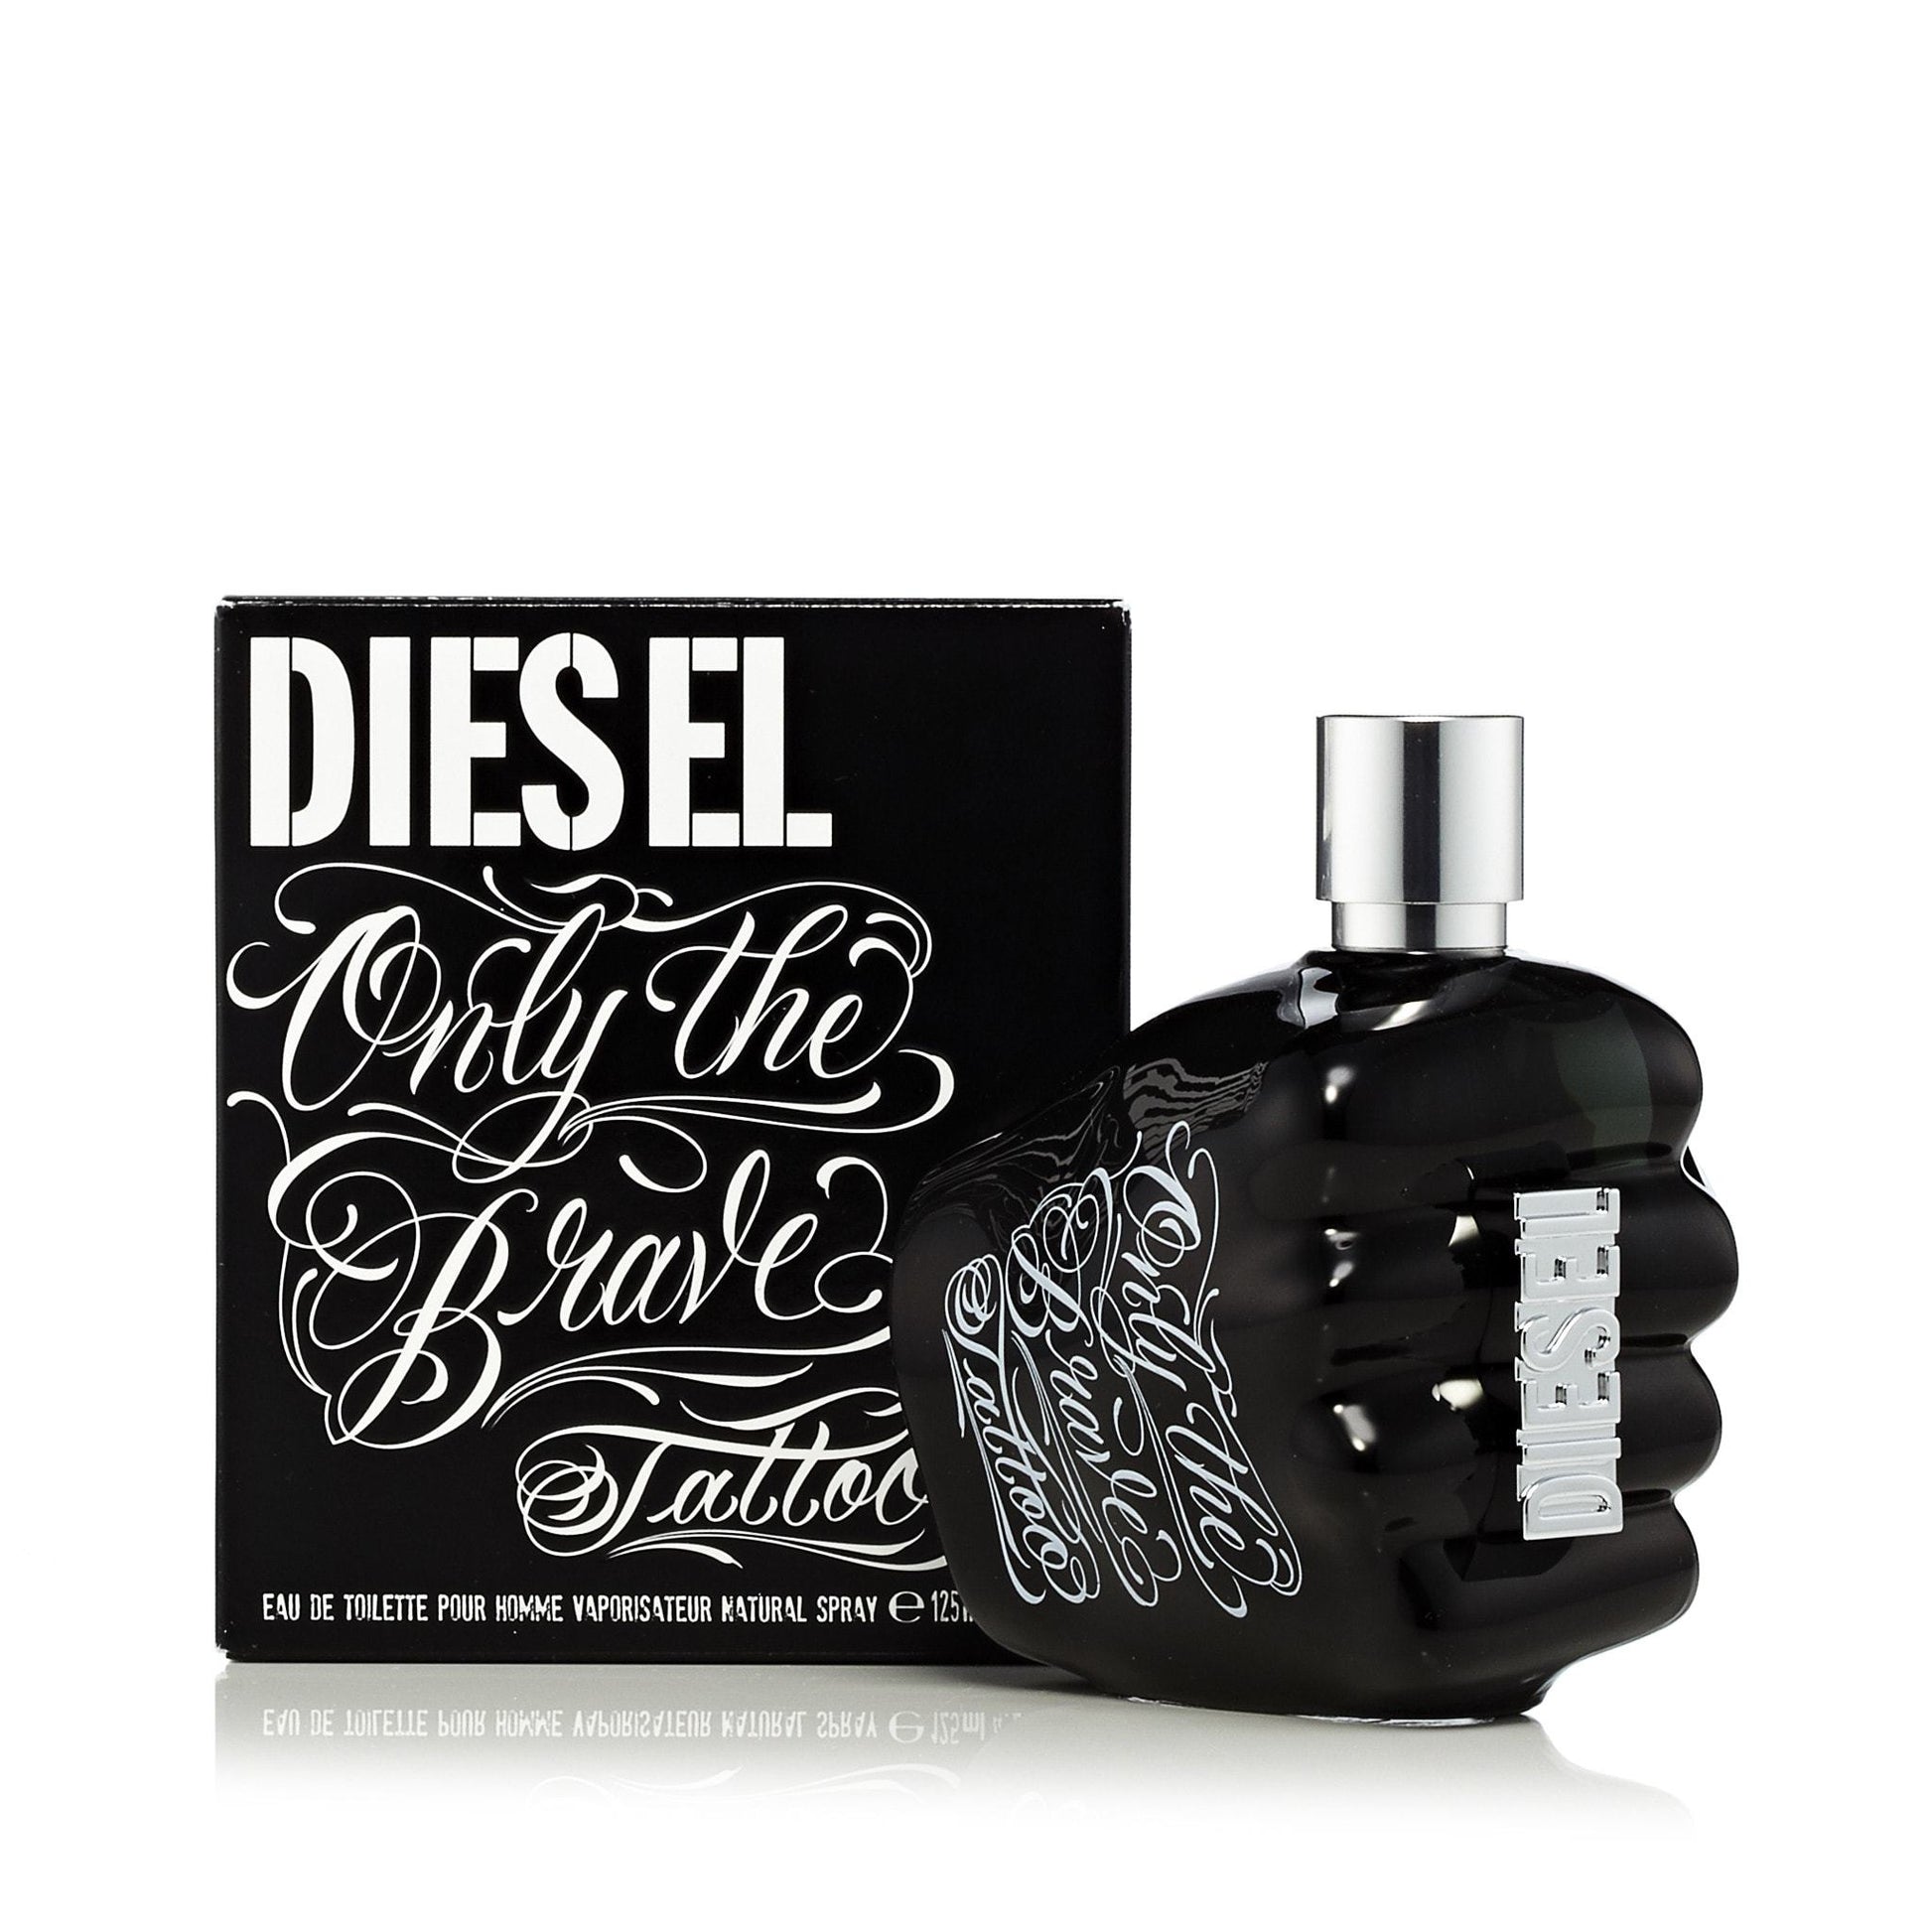 Only The Brave Tattoo Eau de Toilette Spray for Men by Diesel, Product image 4